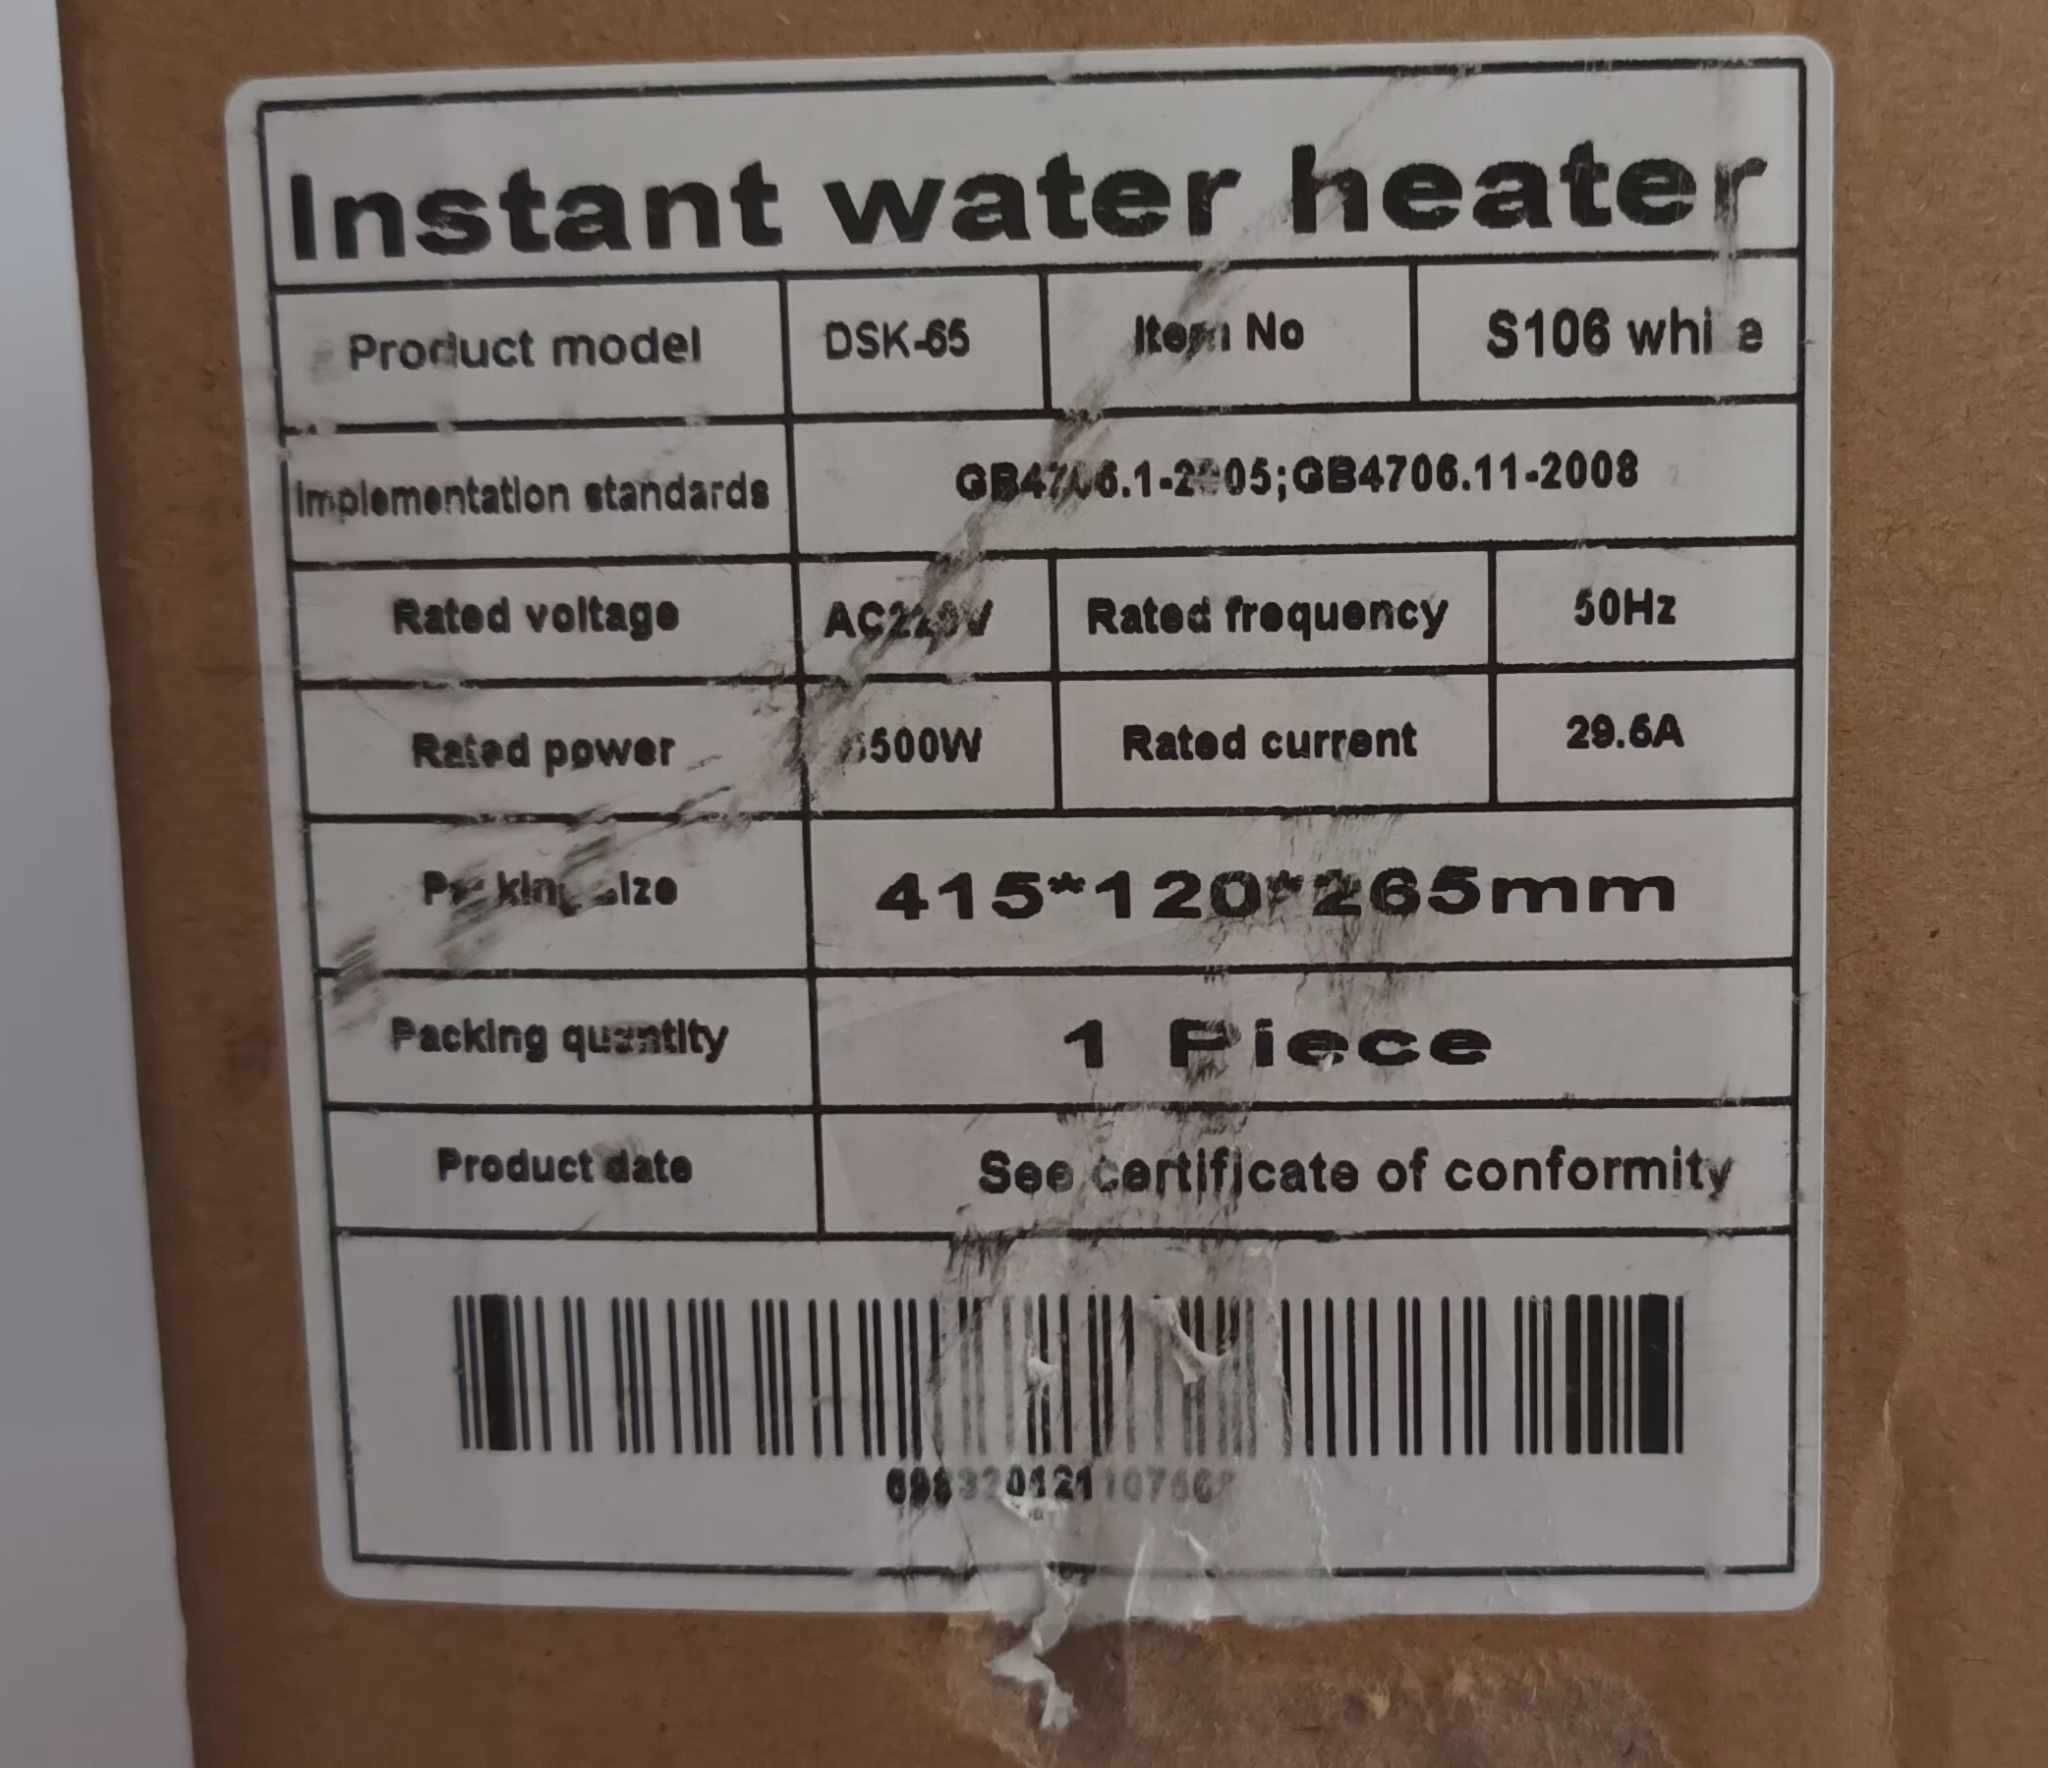 Esquentador  DSK-65 White 6500W  Instant Electrical Hot Water Heater